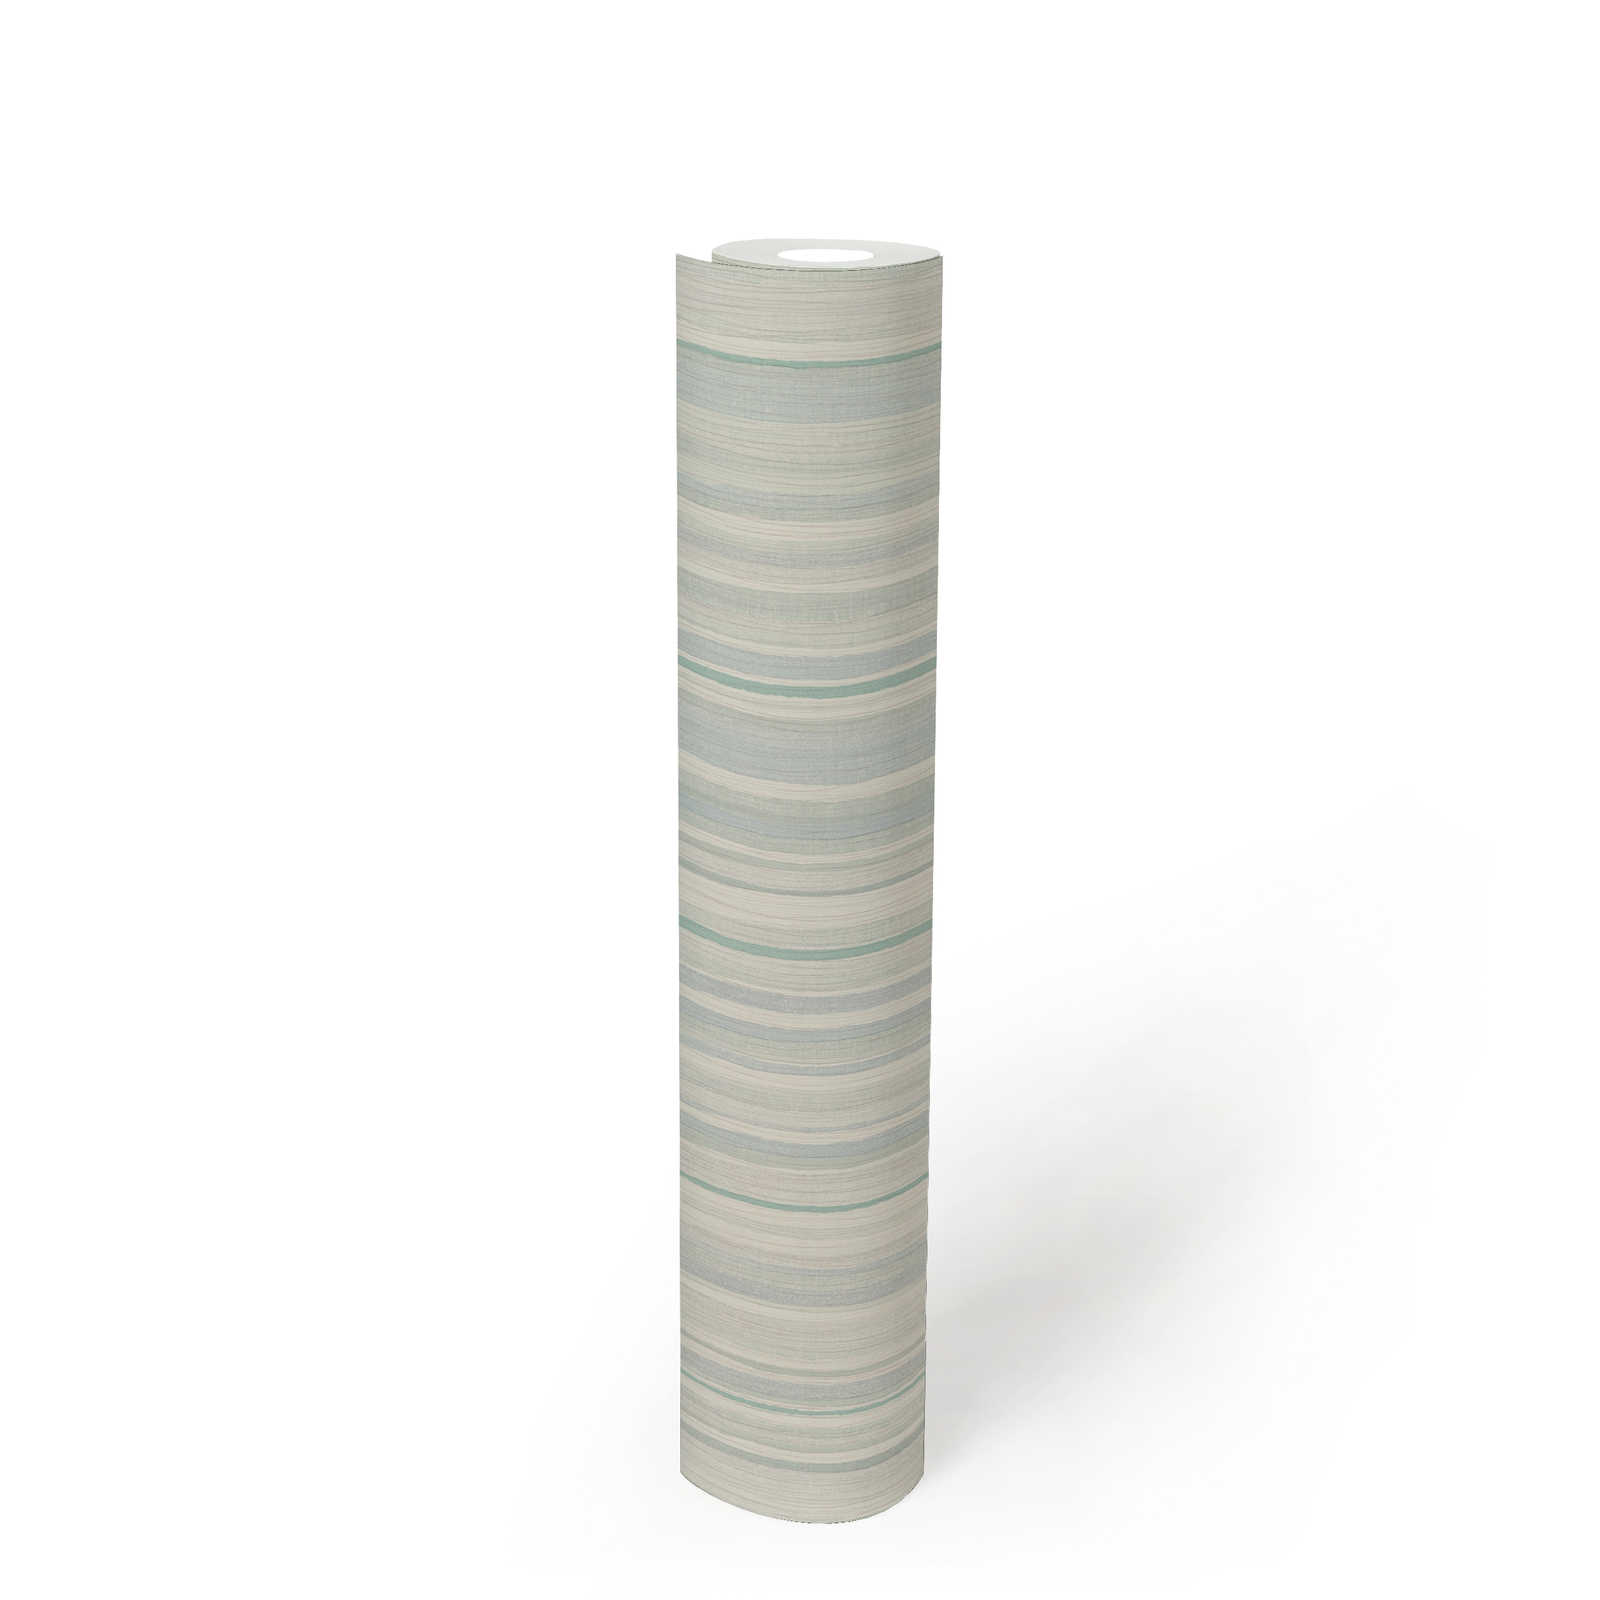             Striped wallpaper with line pattern - blue, green, grey
        